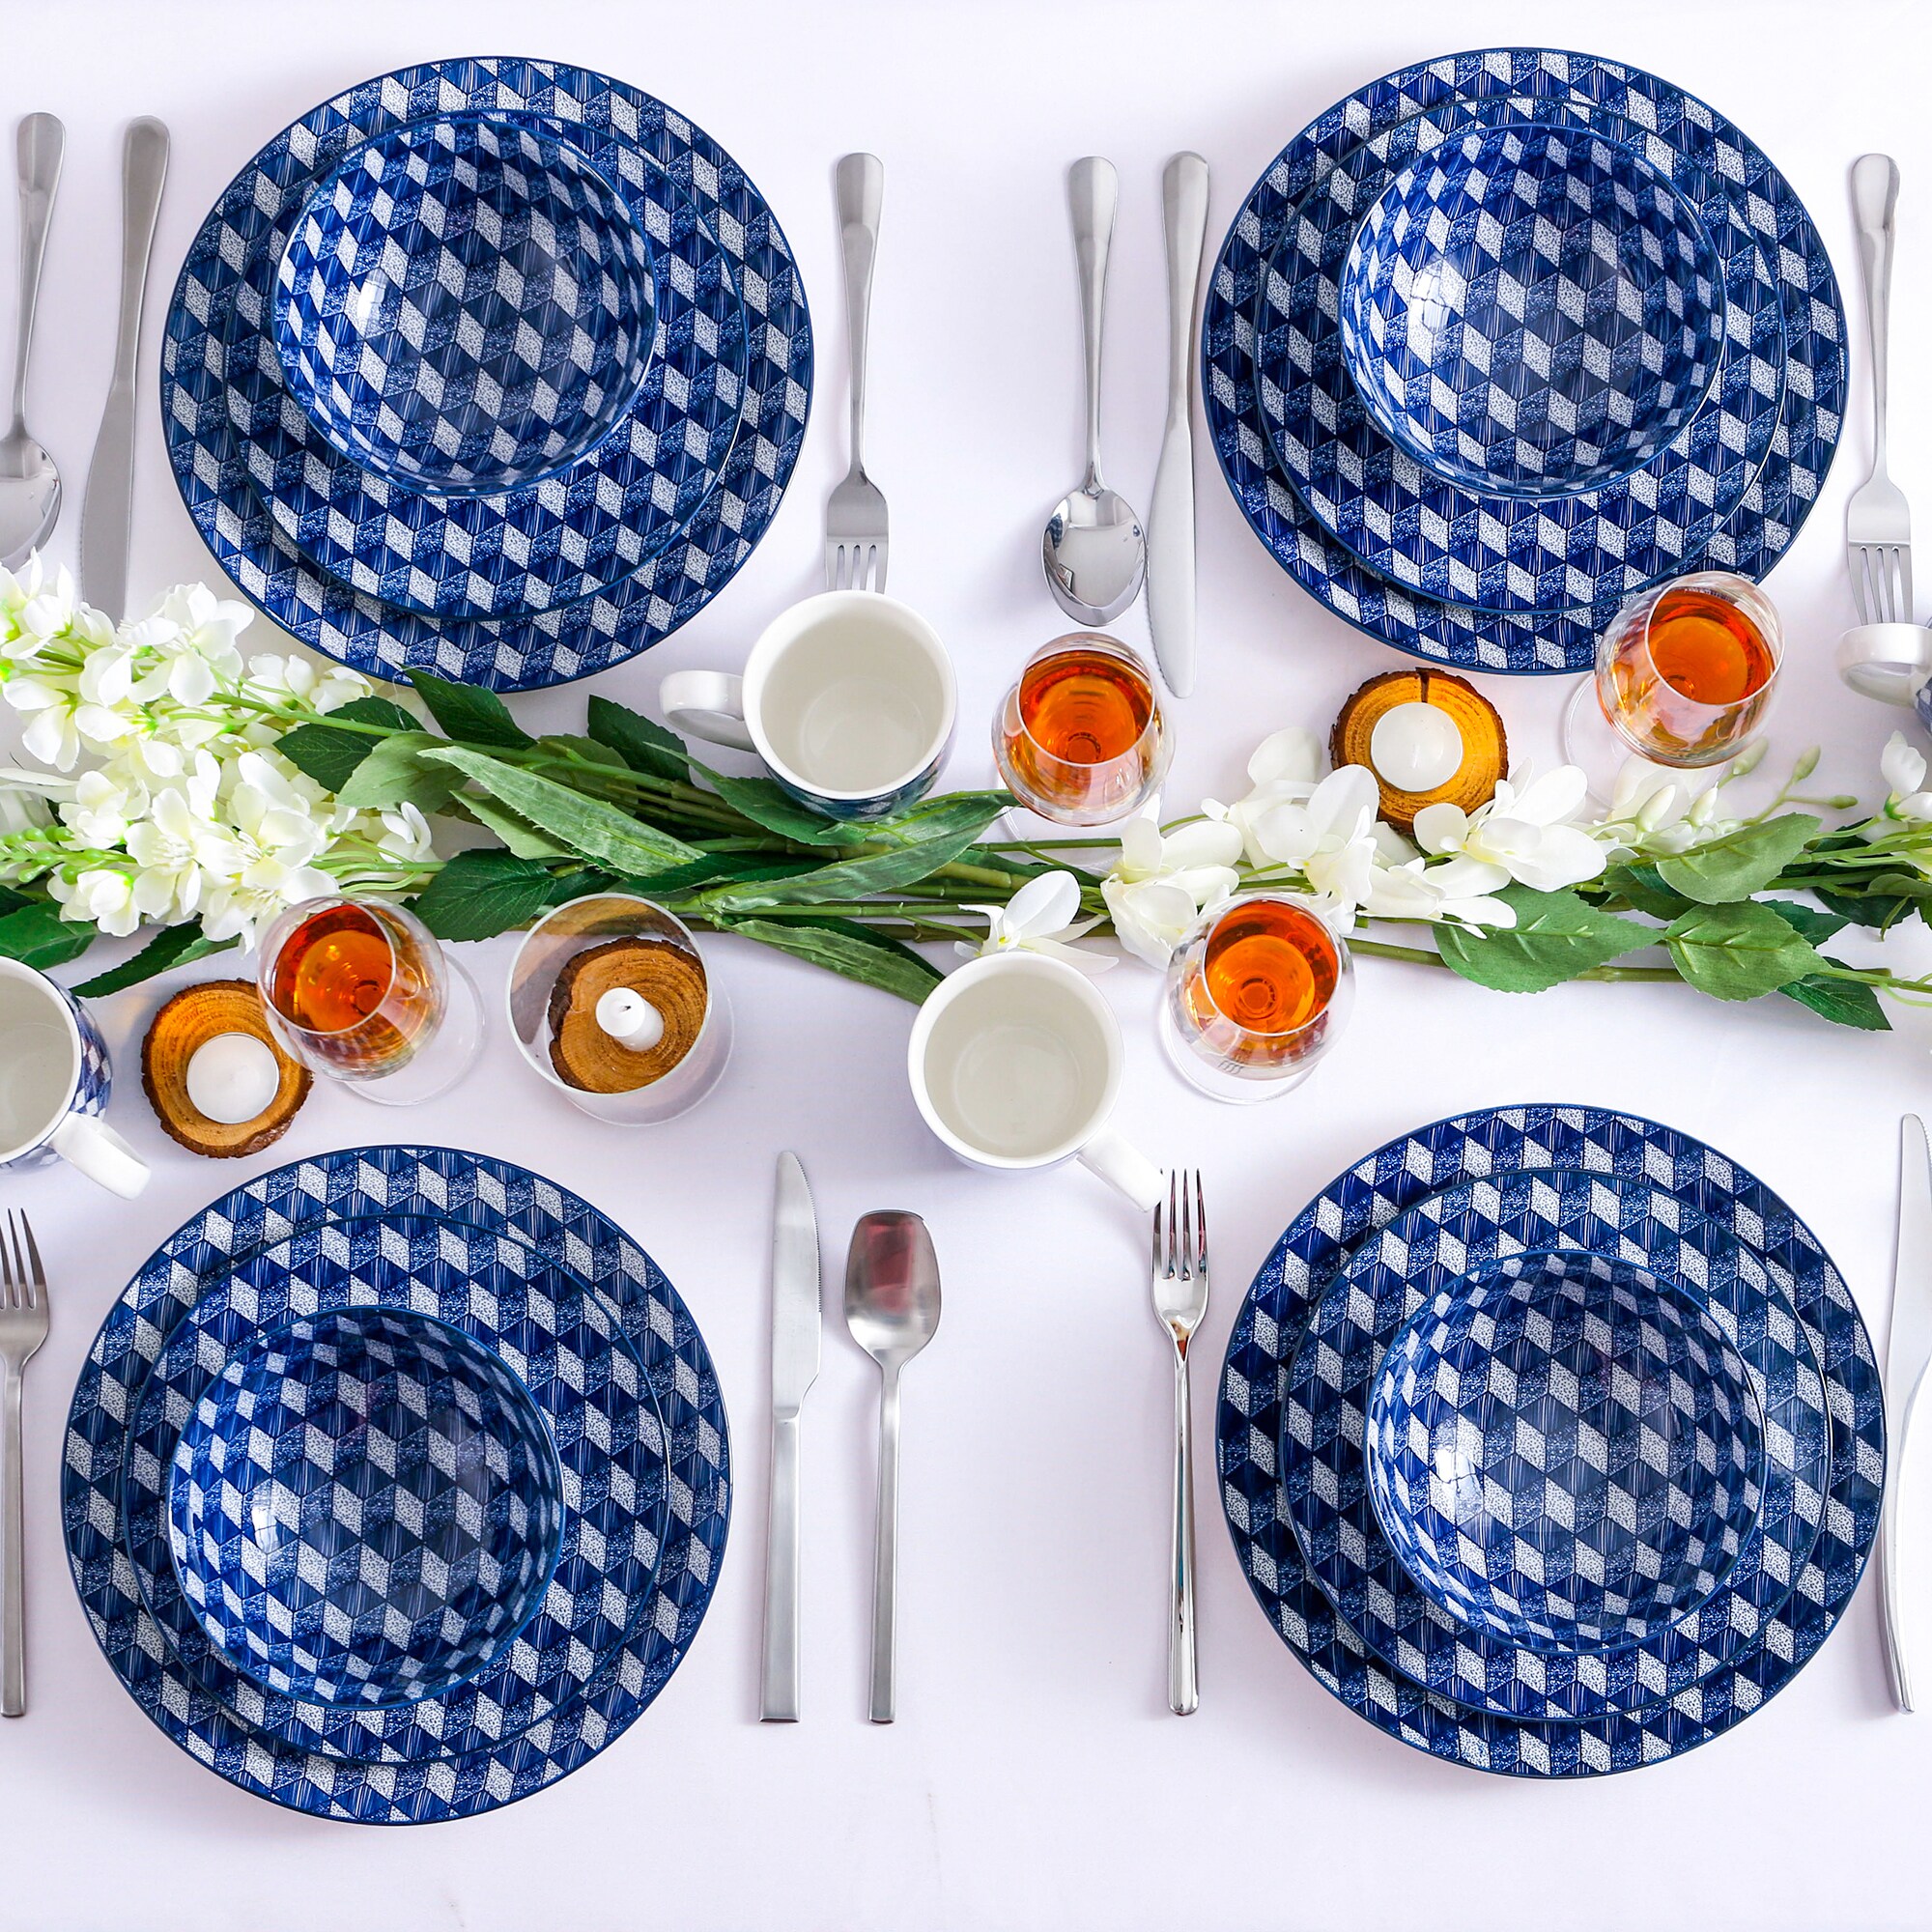 MALACASA Square Plate Set, 12-Piece Marble Plates and Bowls Sets for 6,  Porcelain Dish Set with Dinner Plates and Pasta Bowls, Modern Dinnerware  Sets